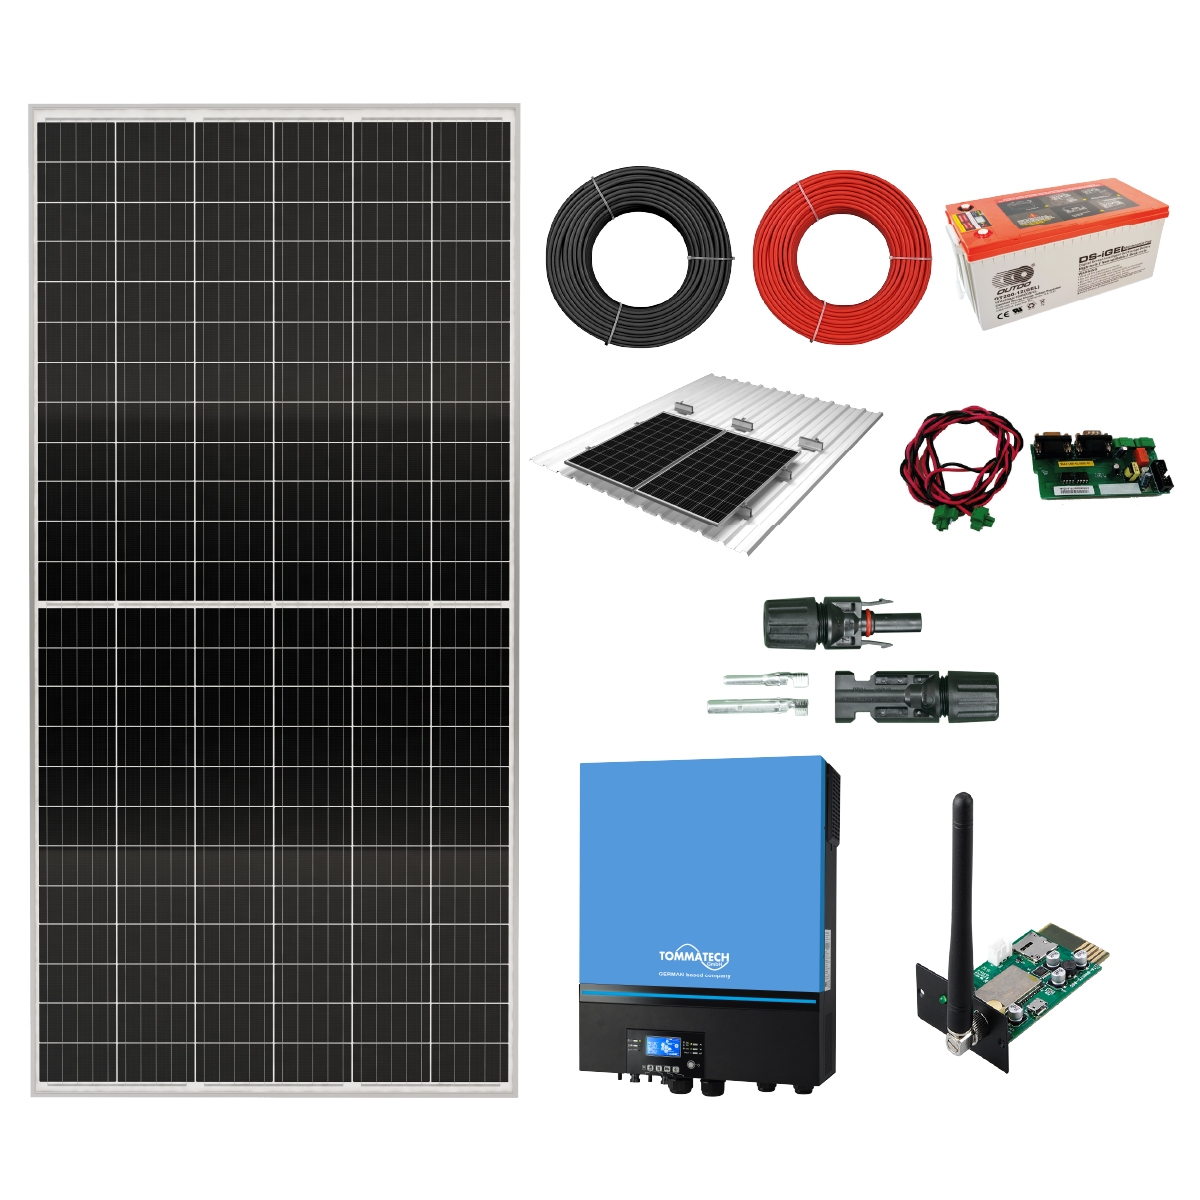 7.2kW / 7.28kWp / 38.4kWh / 1~ Dual MPPT Solar Off-Grid Solution